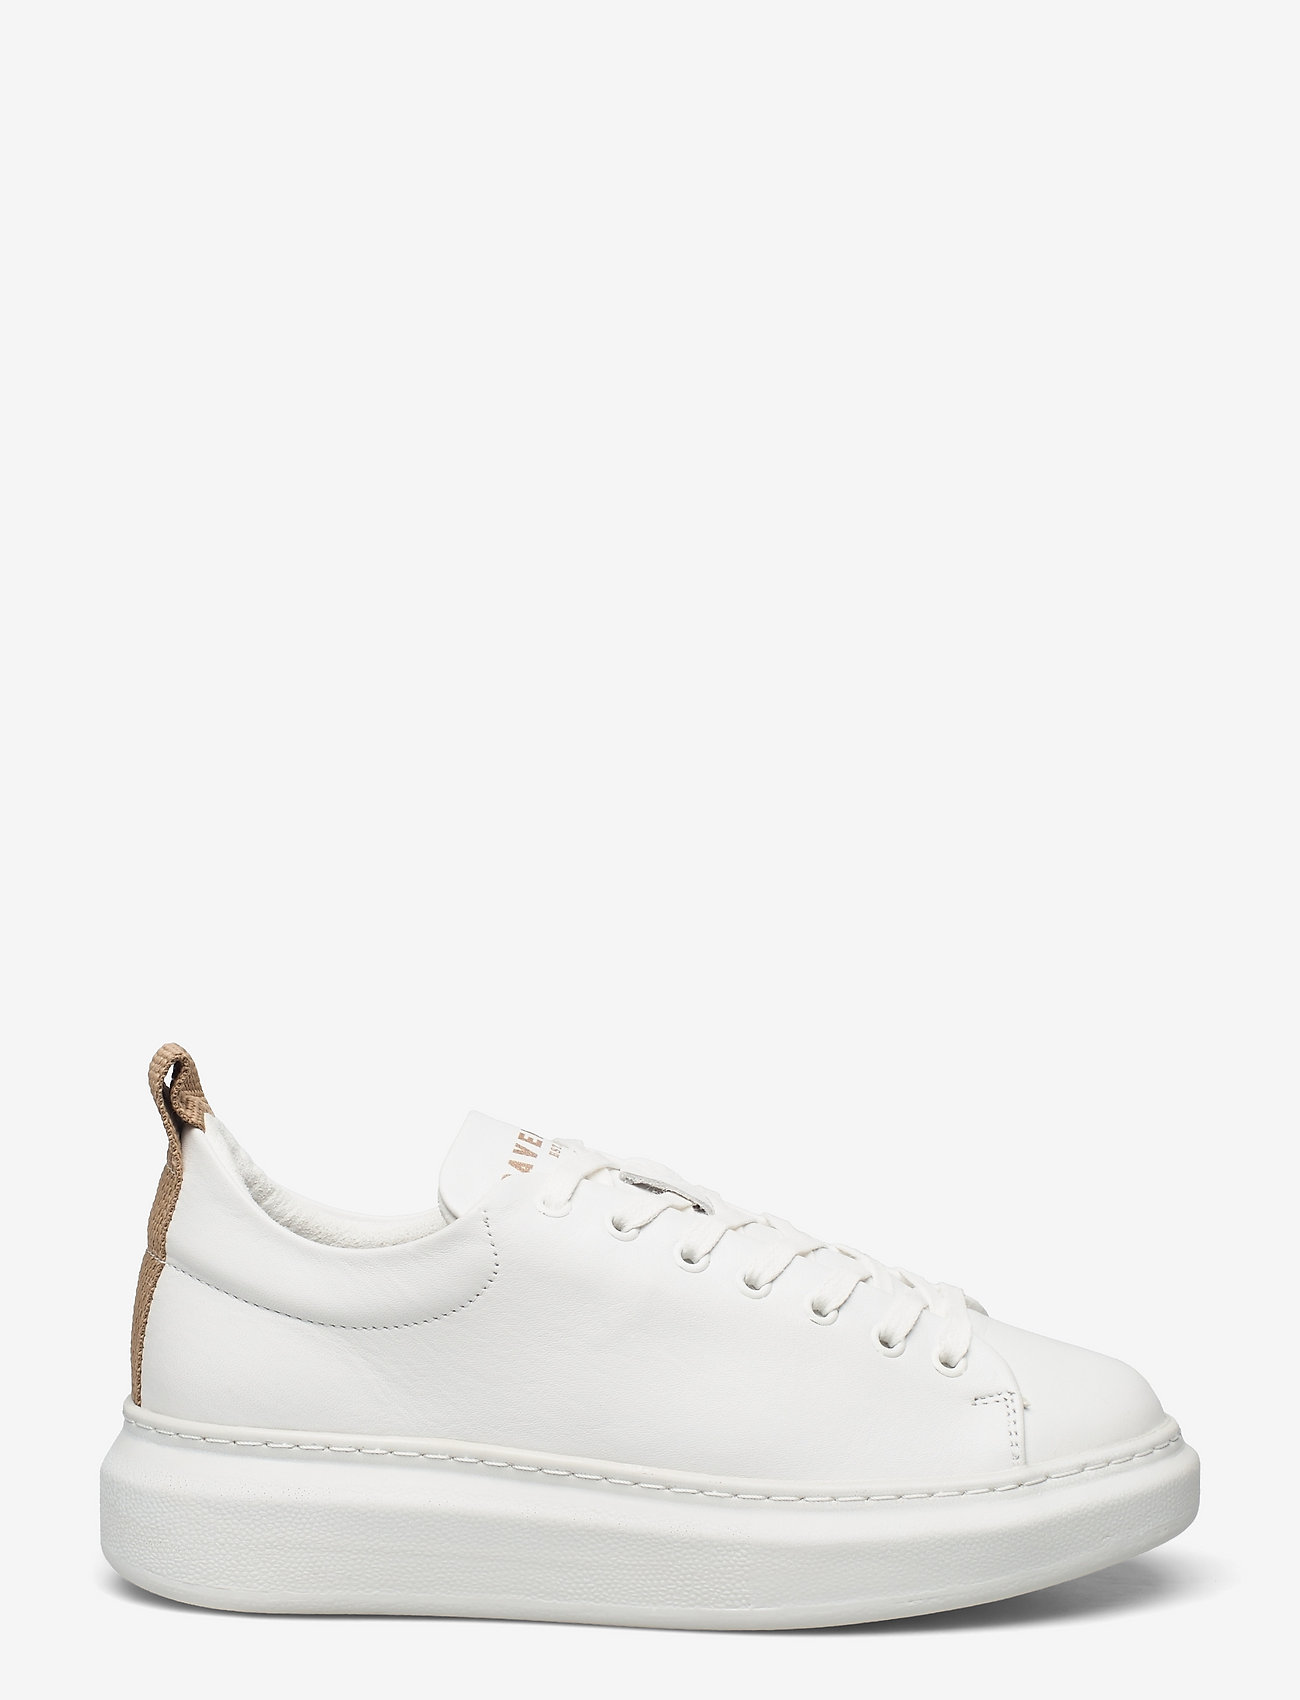 Pavement - Dee color - low top sneakers - white/beige - 1